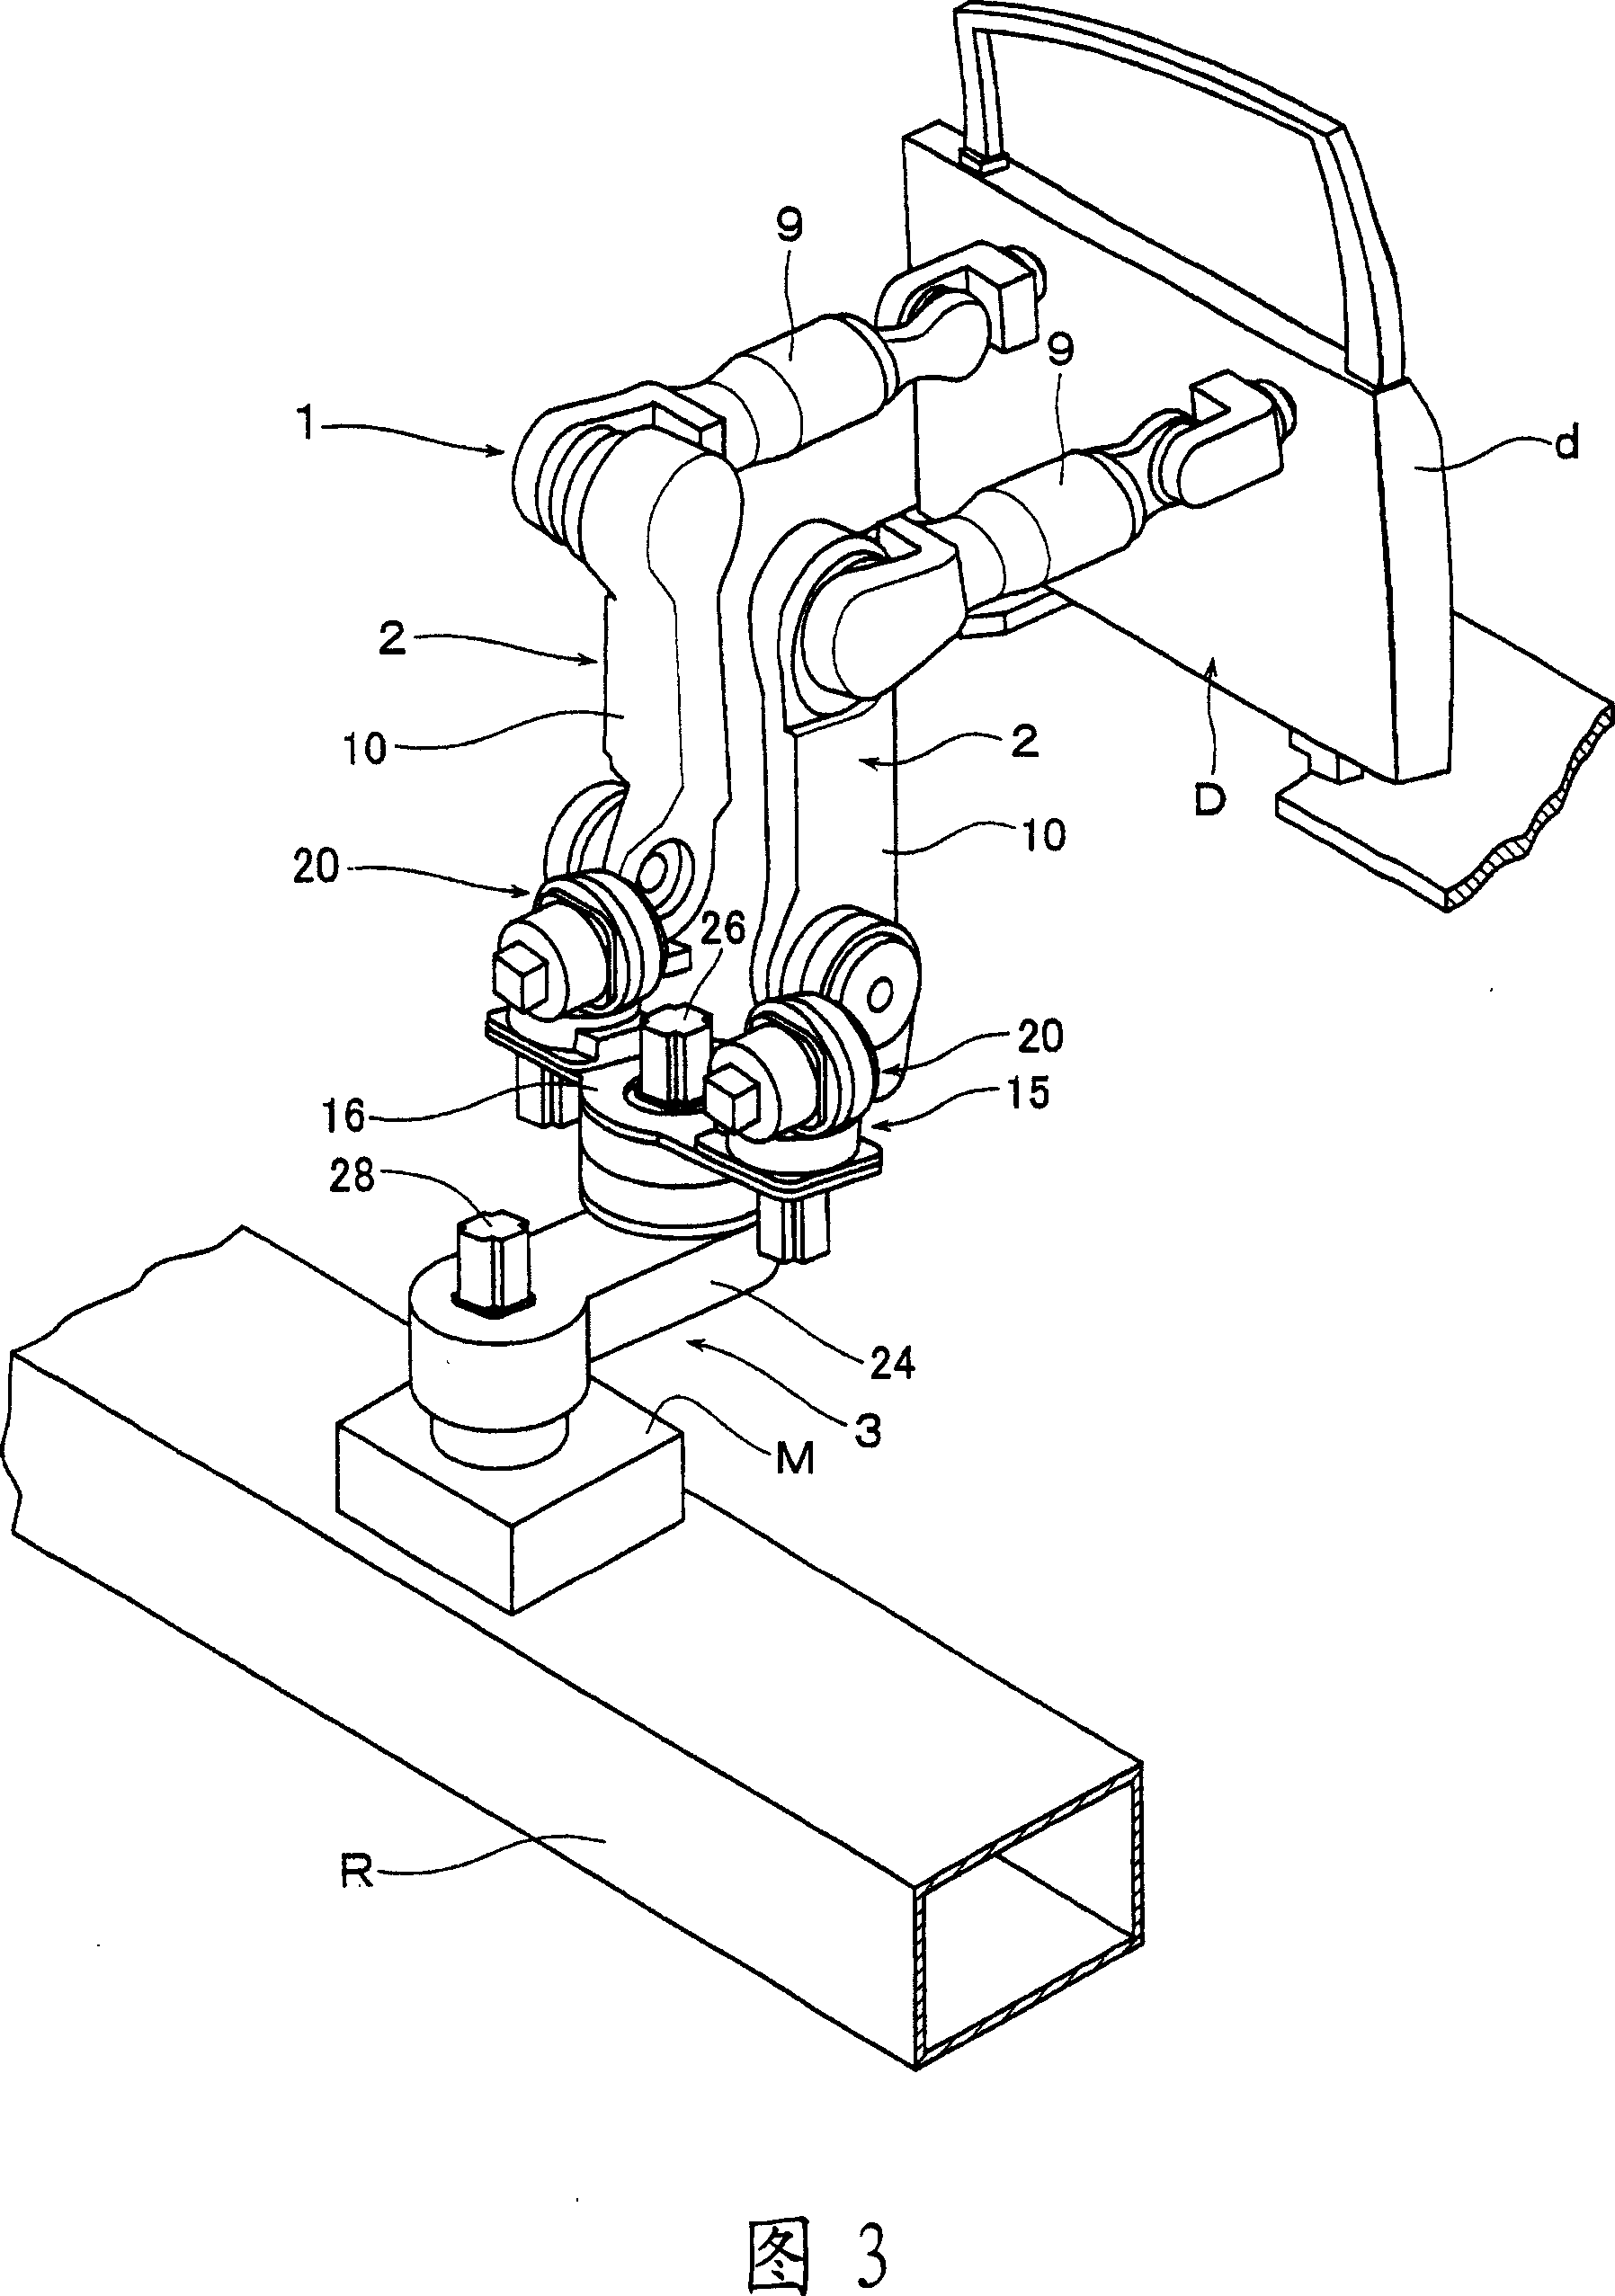 Processing and transferring apparatus